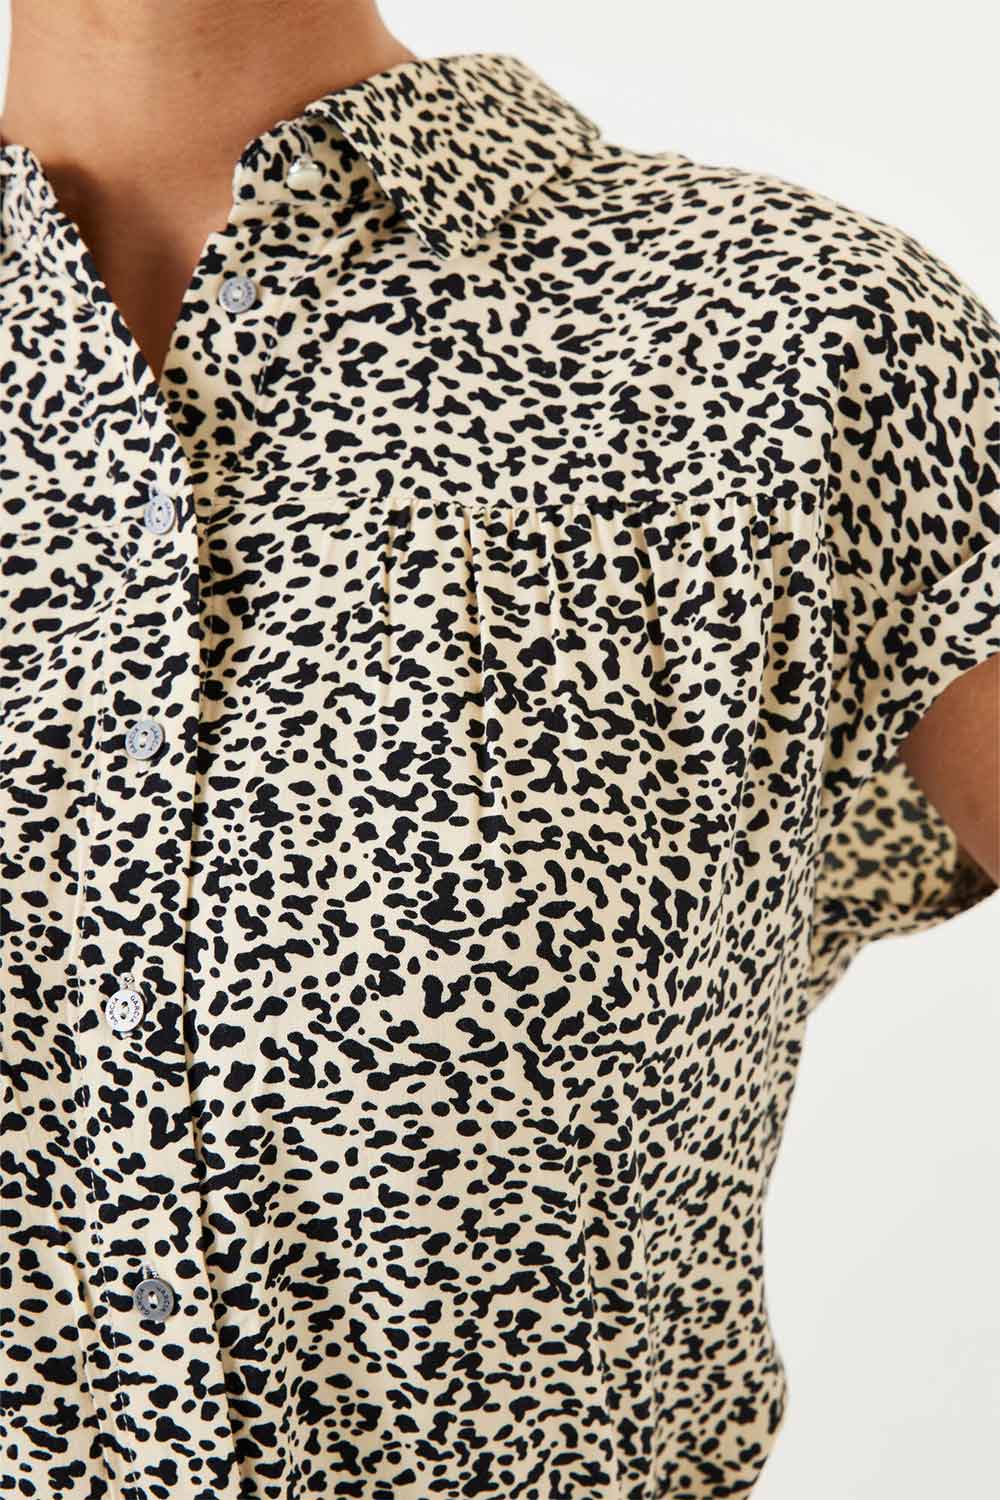 Close up of print on Garcia (Q40031) Women's Short Cap Sleeve Button Up Blouse with Shirt Collar in Leopard Print